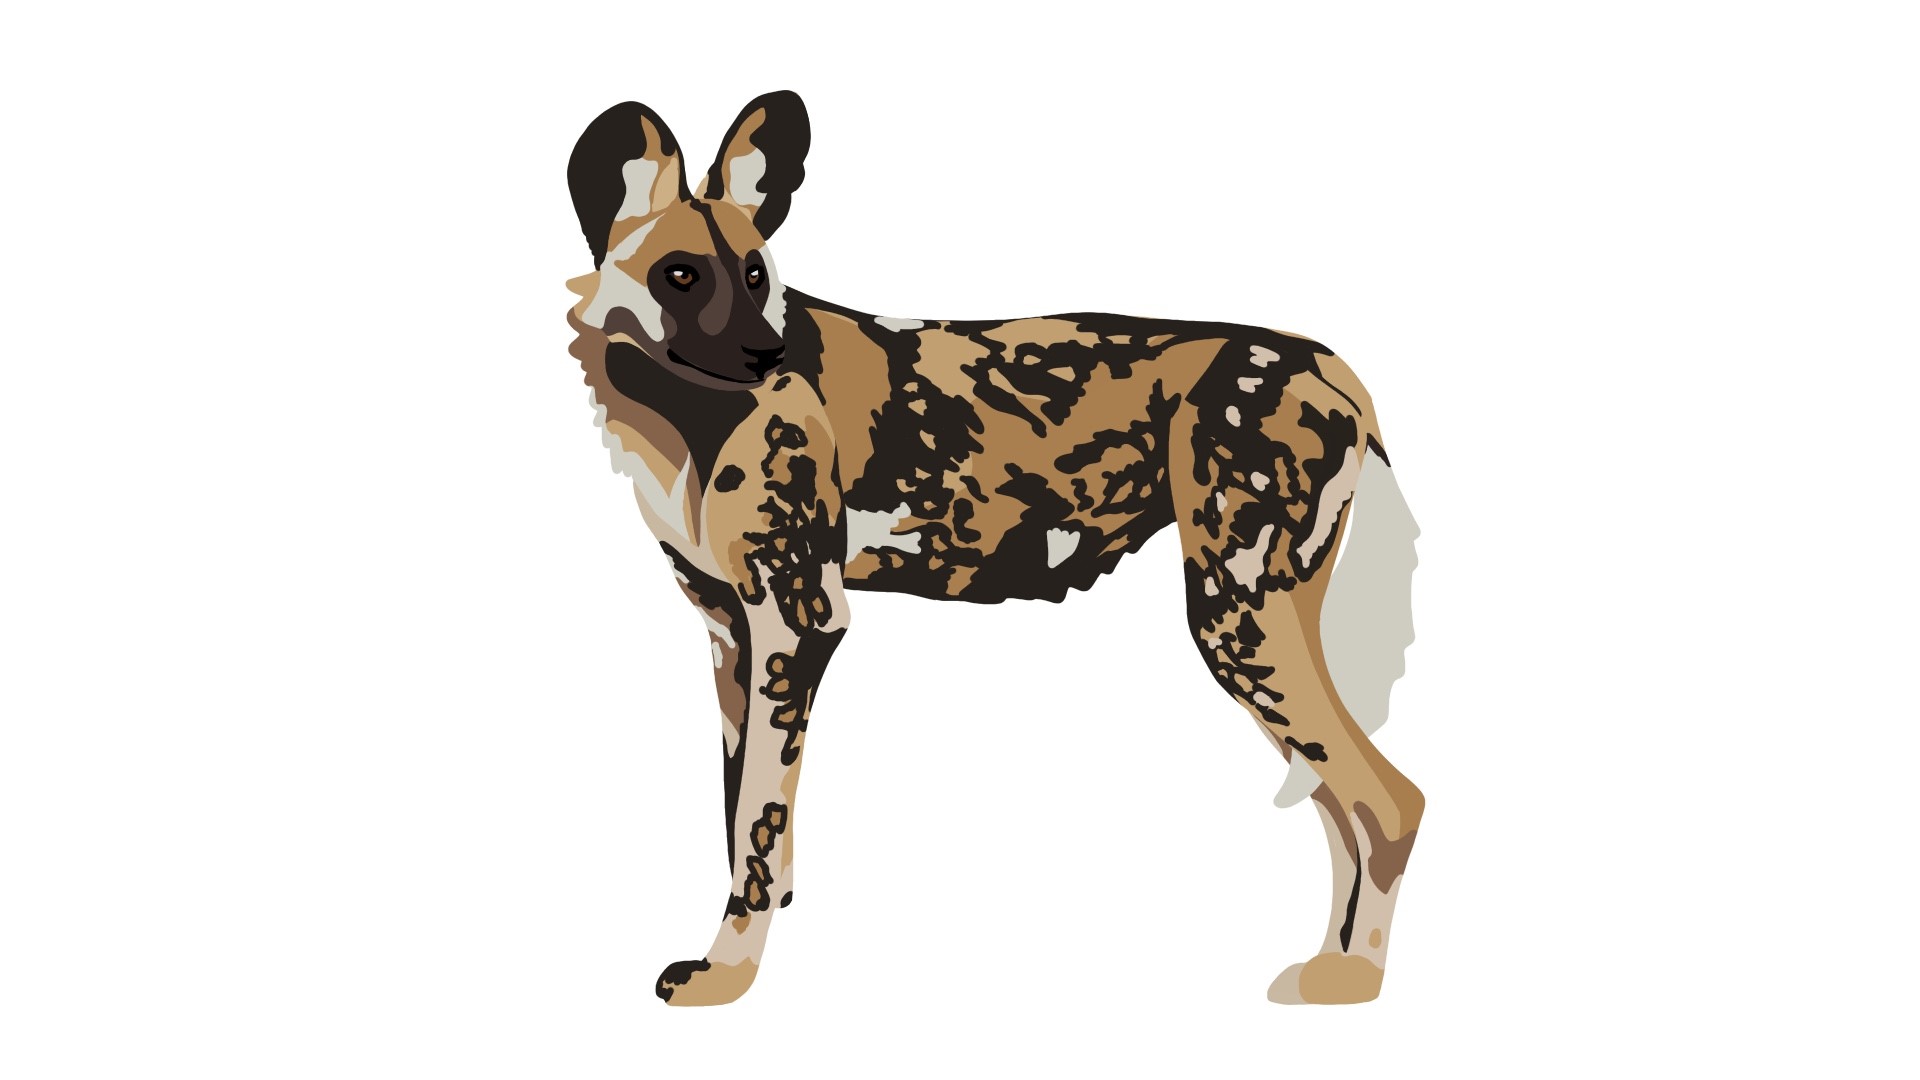 2D Animation of a wild dog